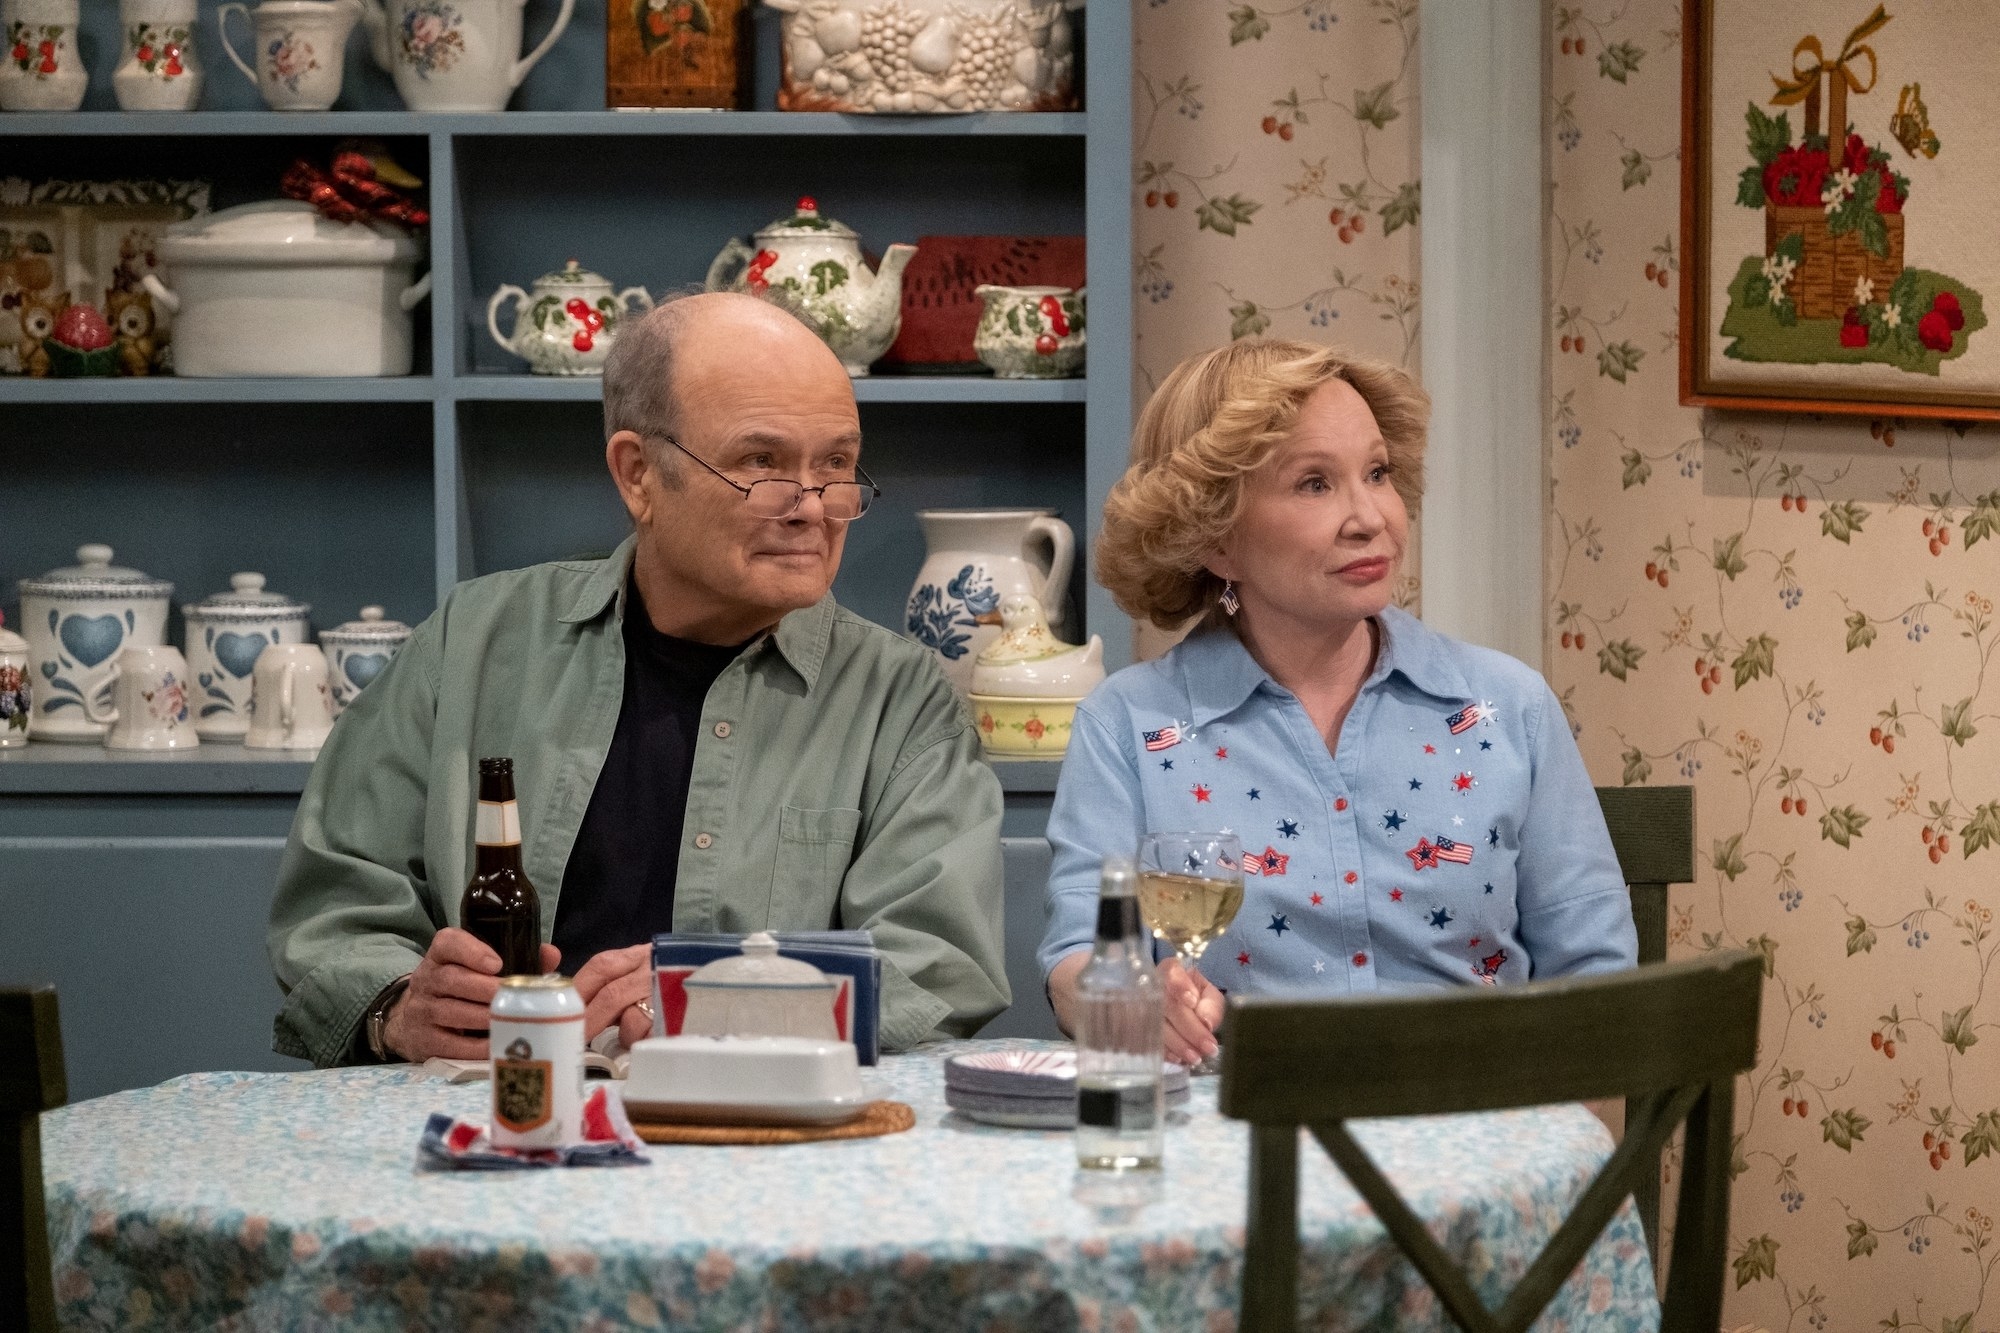 Kurtwood Smith as Red Forman, Debra Jo Rupp as Kitty Forman in episode 101 of That ‘90s Show